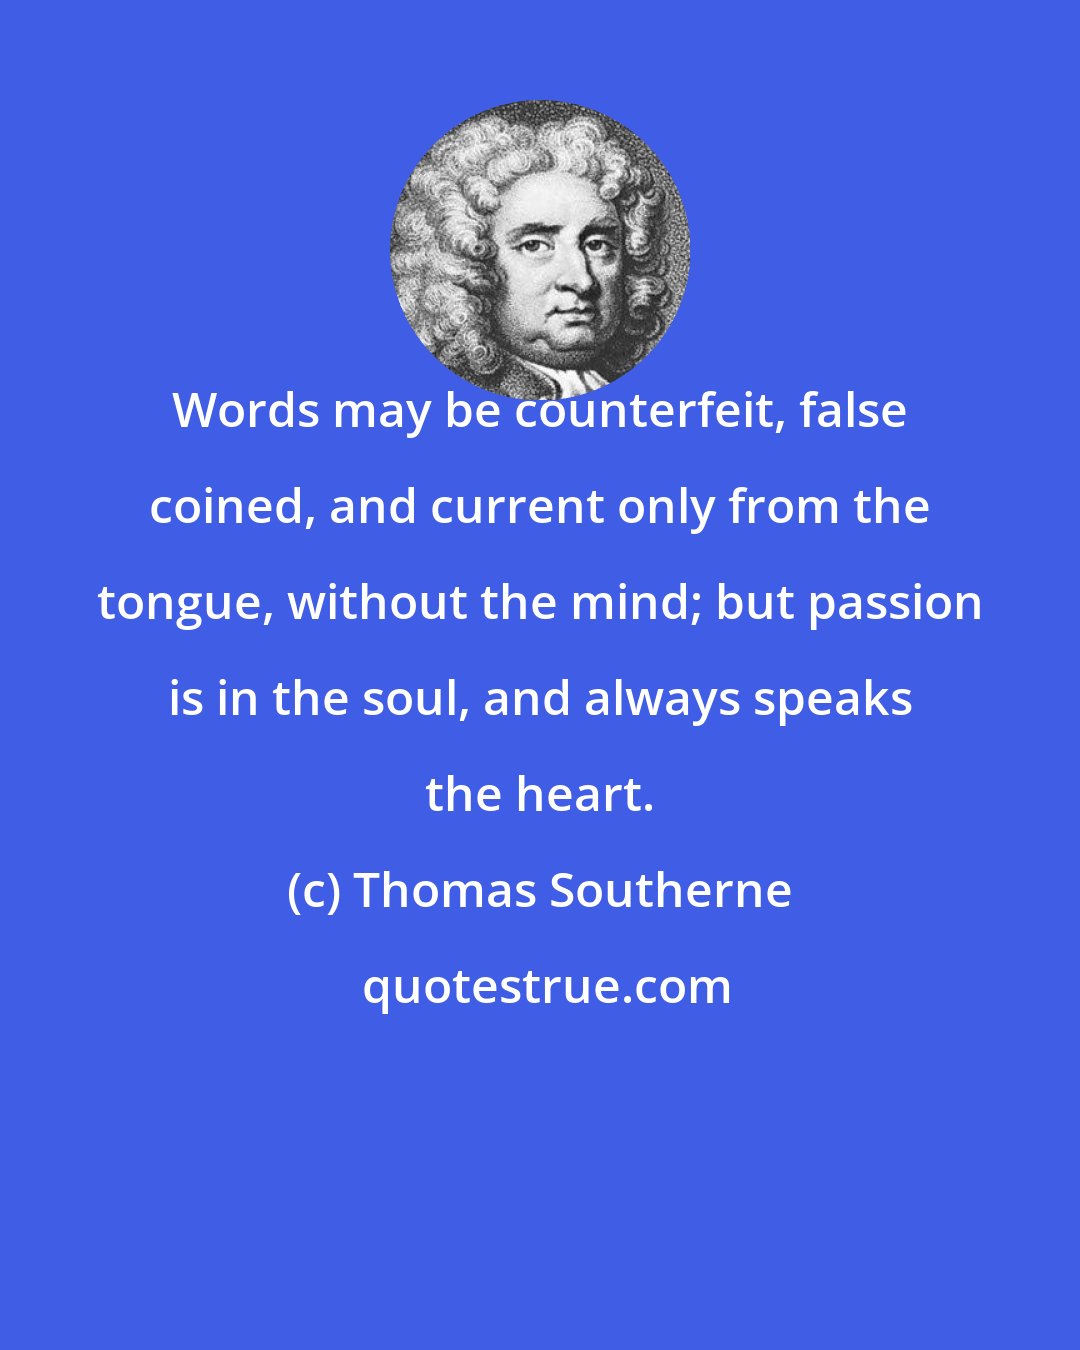 Thomas Southerne: Words may be counterfeit, false coined, and current only from the tongue, without the mind; but passion is in the soul, and always speaks the heart.